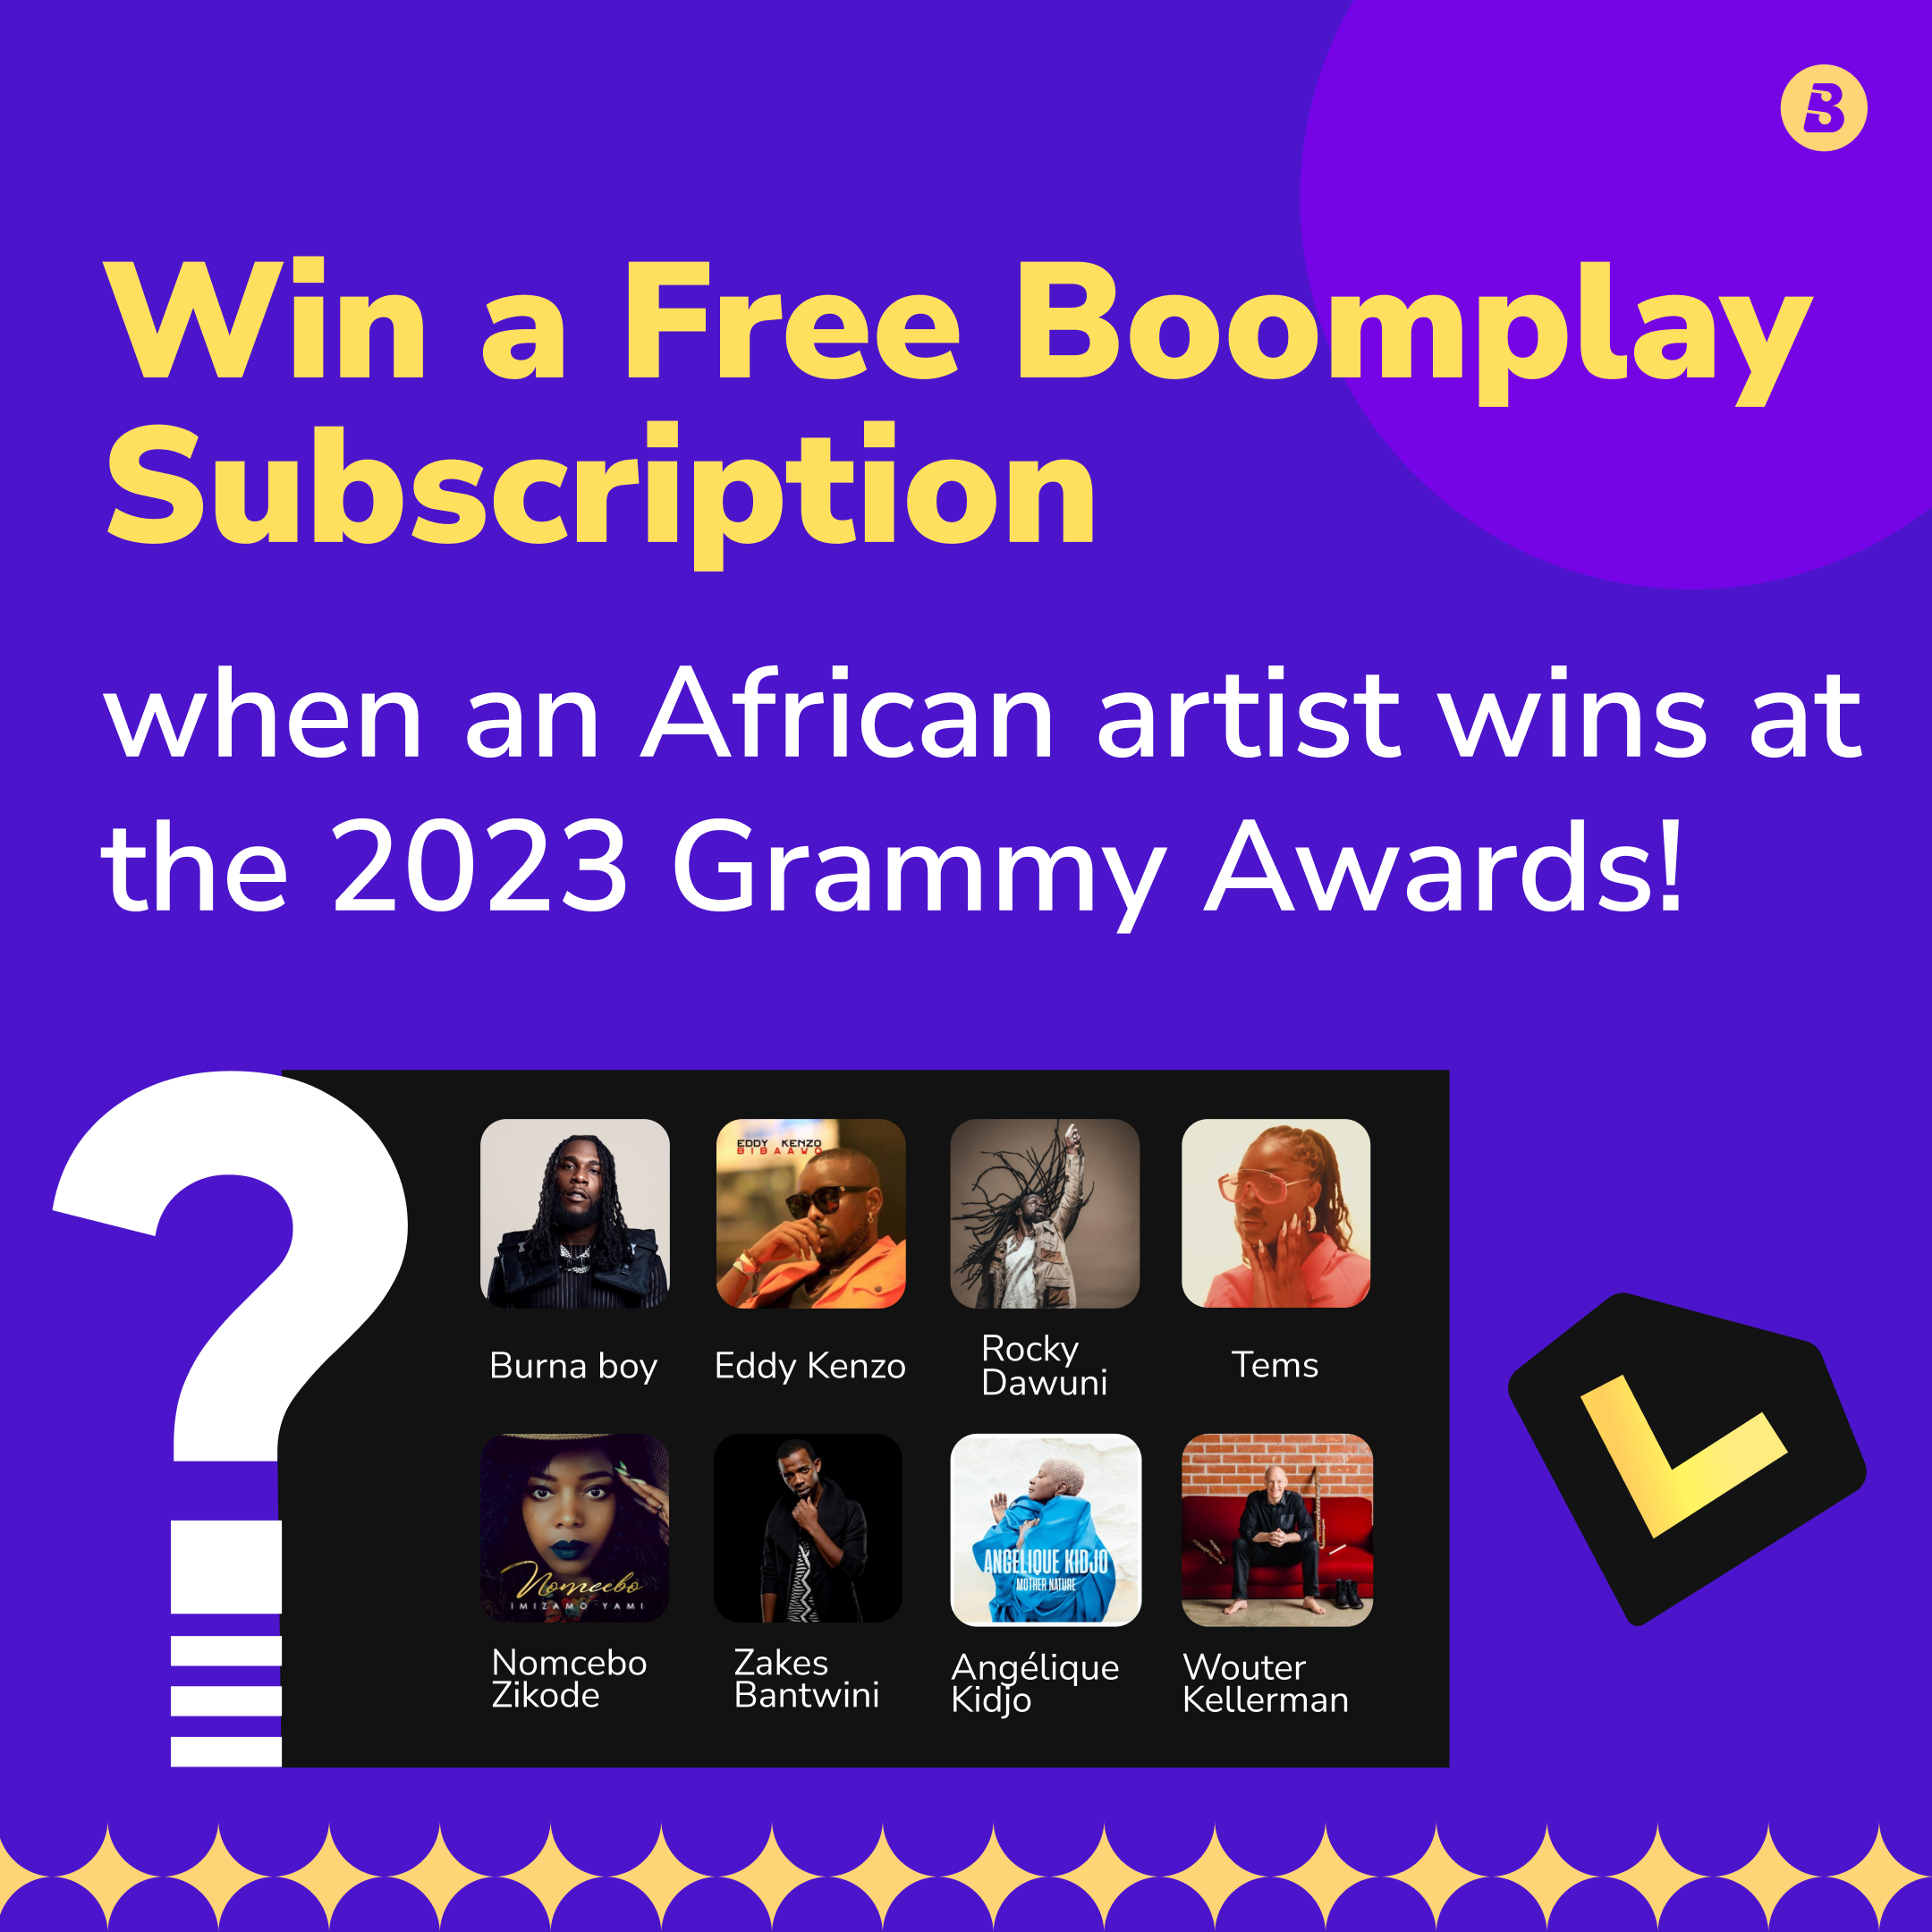 Cheer on our African stars nominated for the 65th Grammy Awards! Who will bring home the awards?